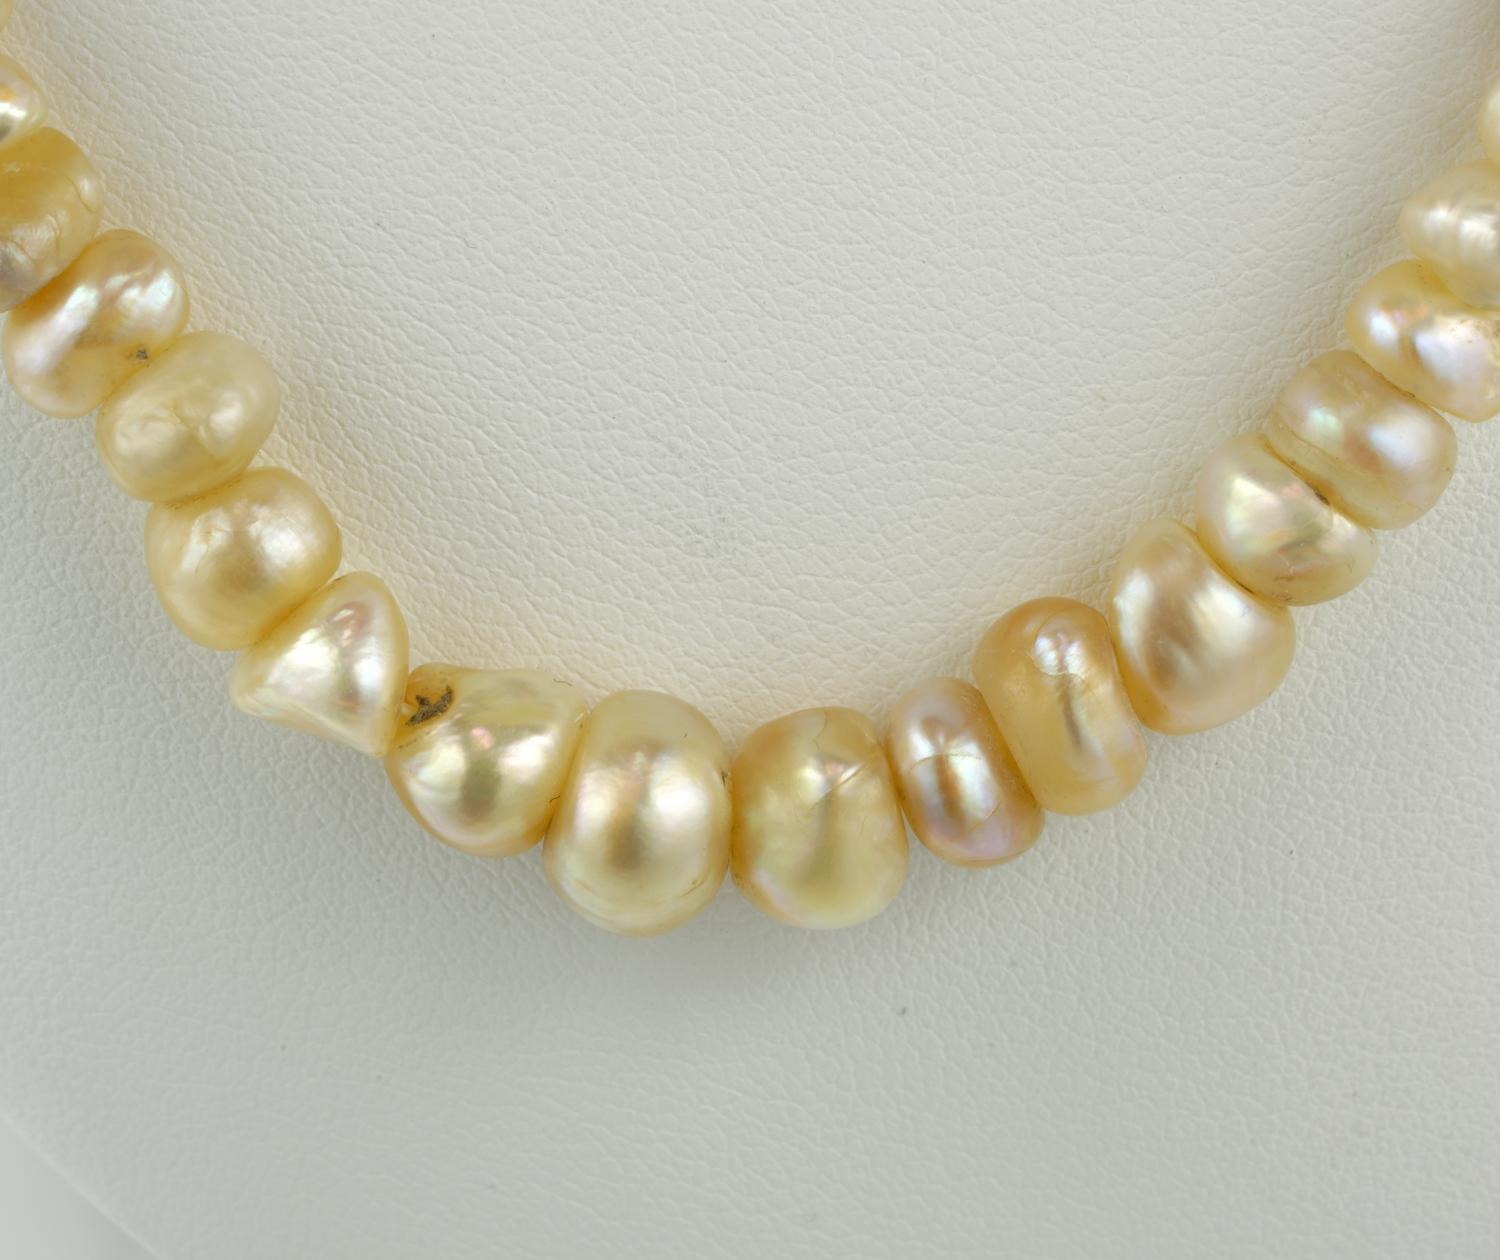 basra pearl necklace price